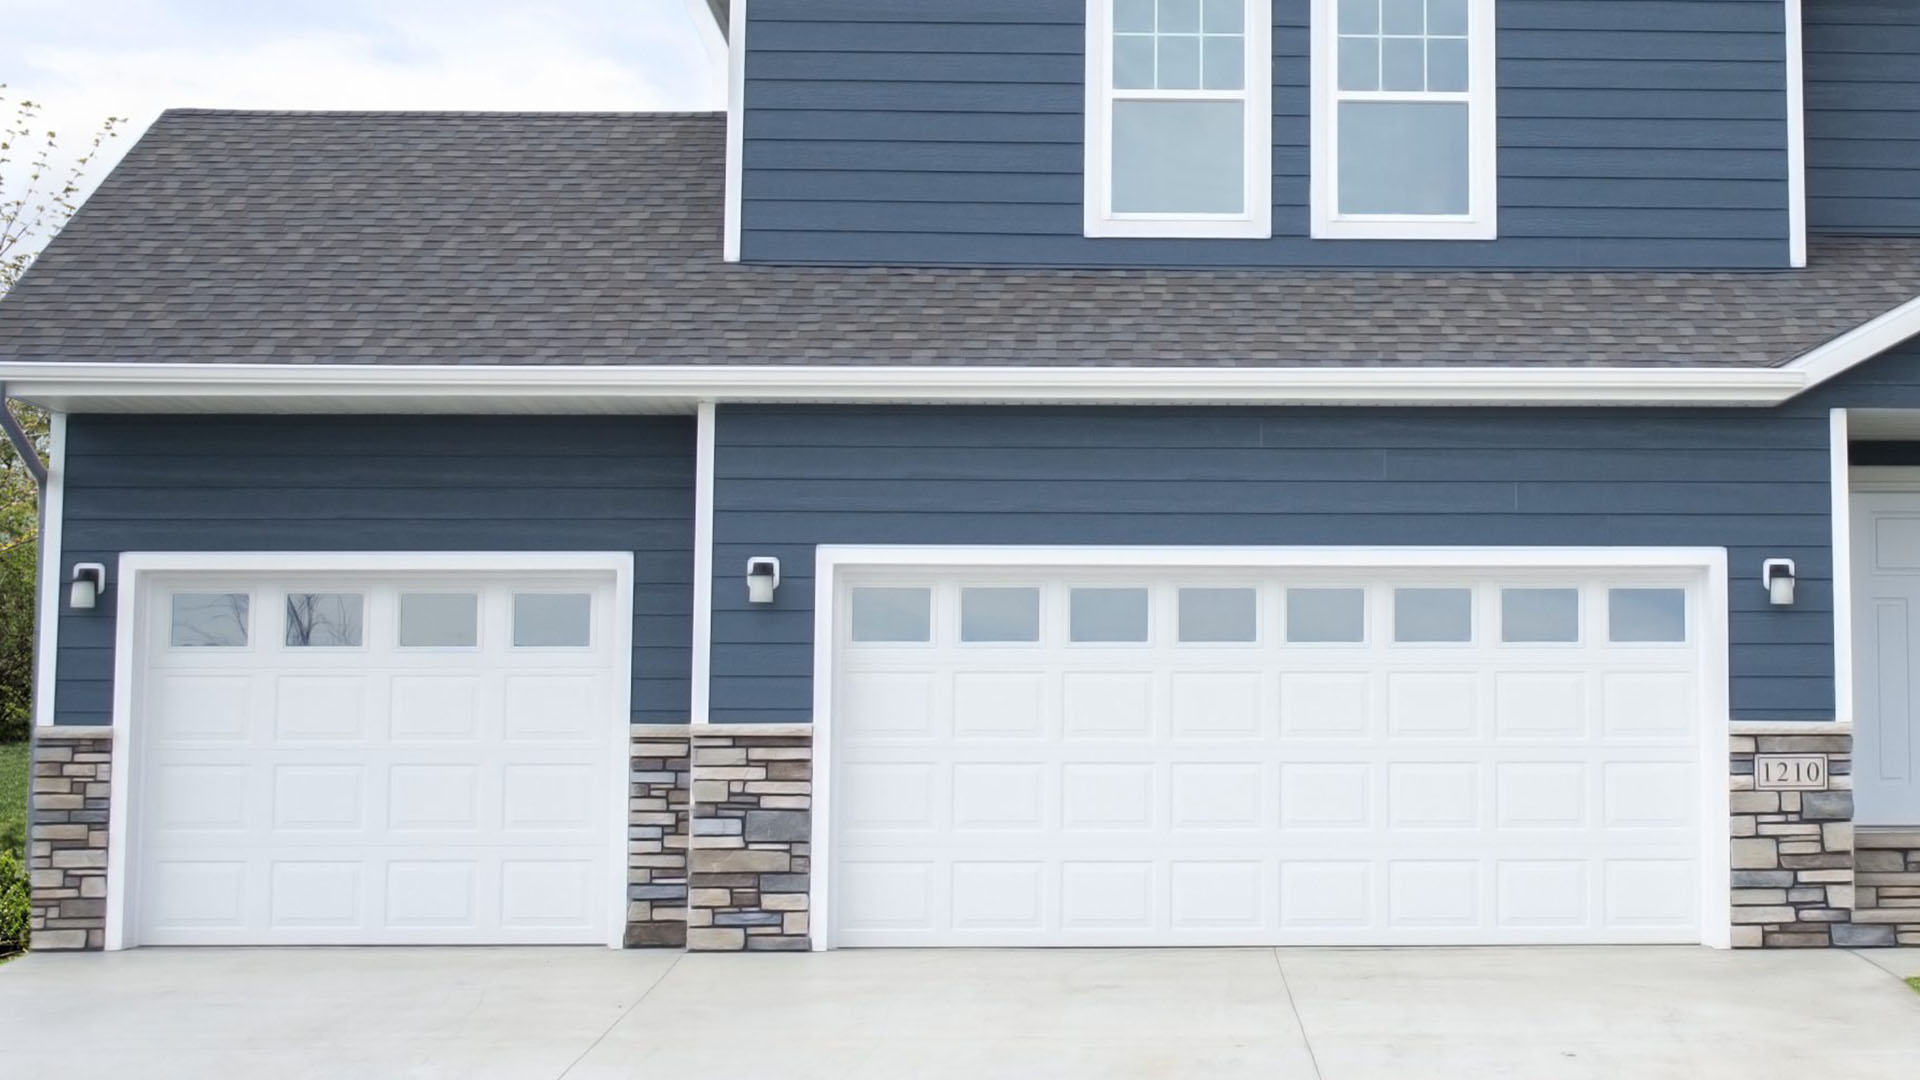 Two section garage with white doors